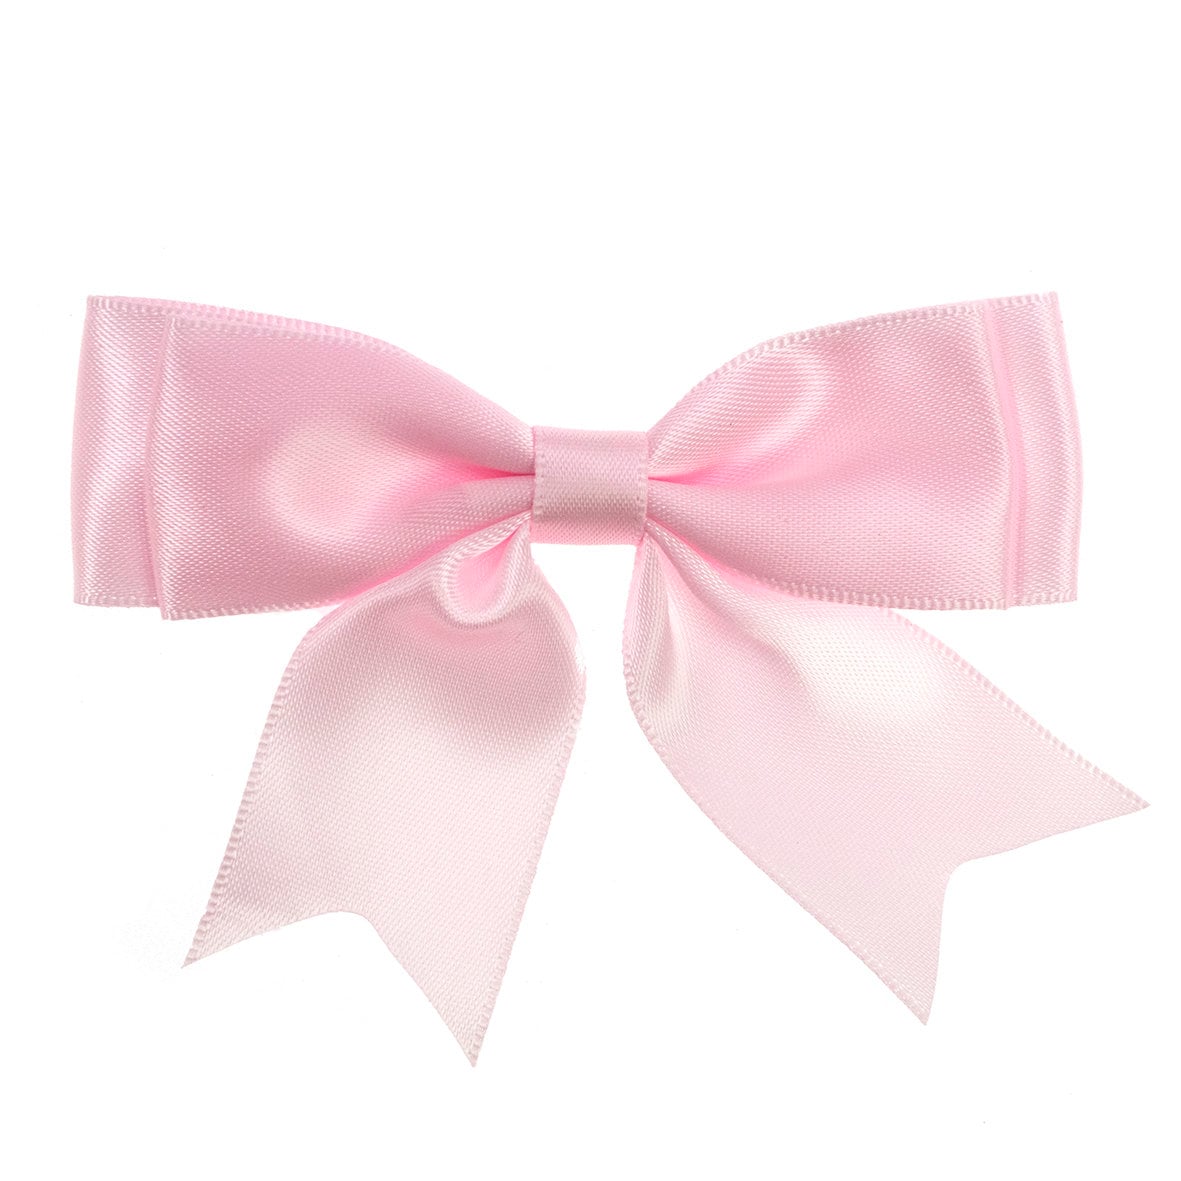 3 X 2-3/4 Hot Pink Satin Pre-Tied Bows With Twist Ties